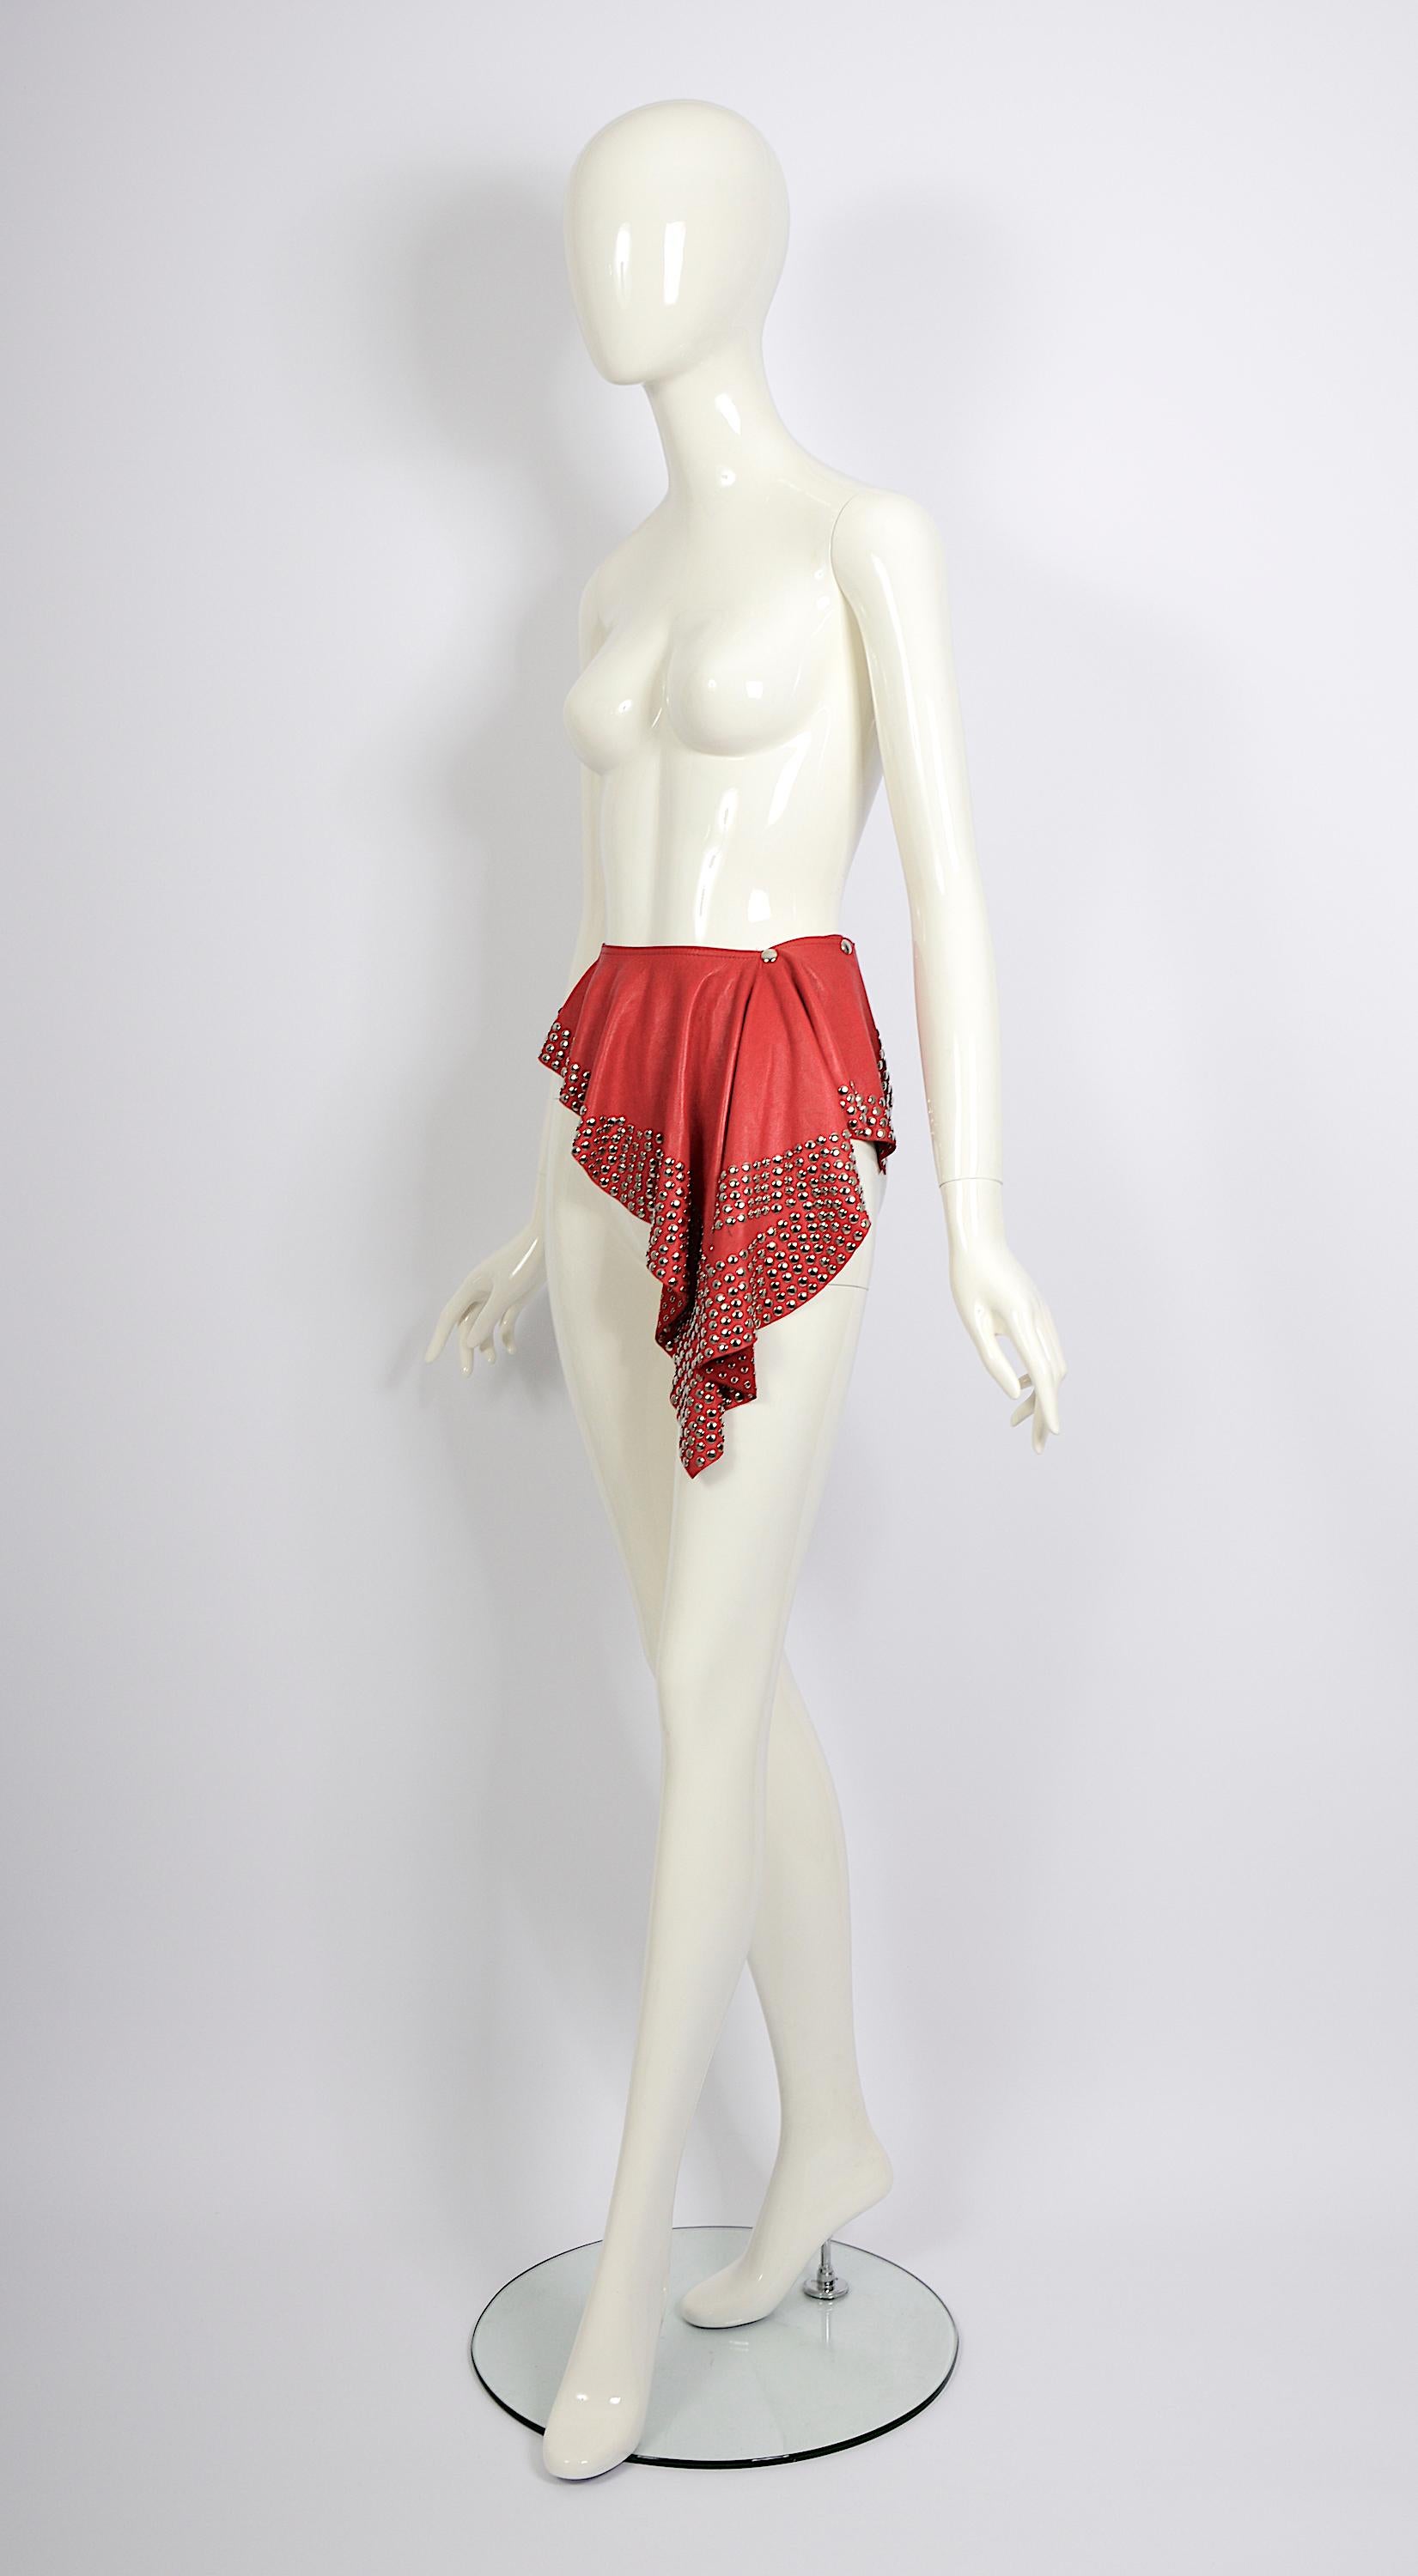 Azzedine Alaia circa 1981 collectors studded embellished red leather belt skirt For Sale 7